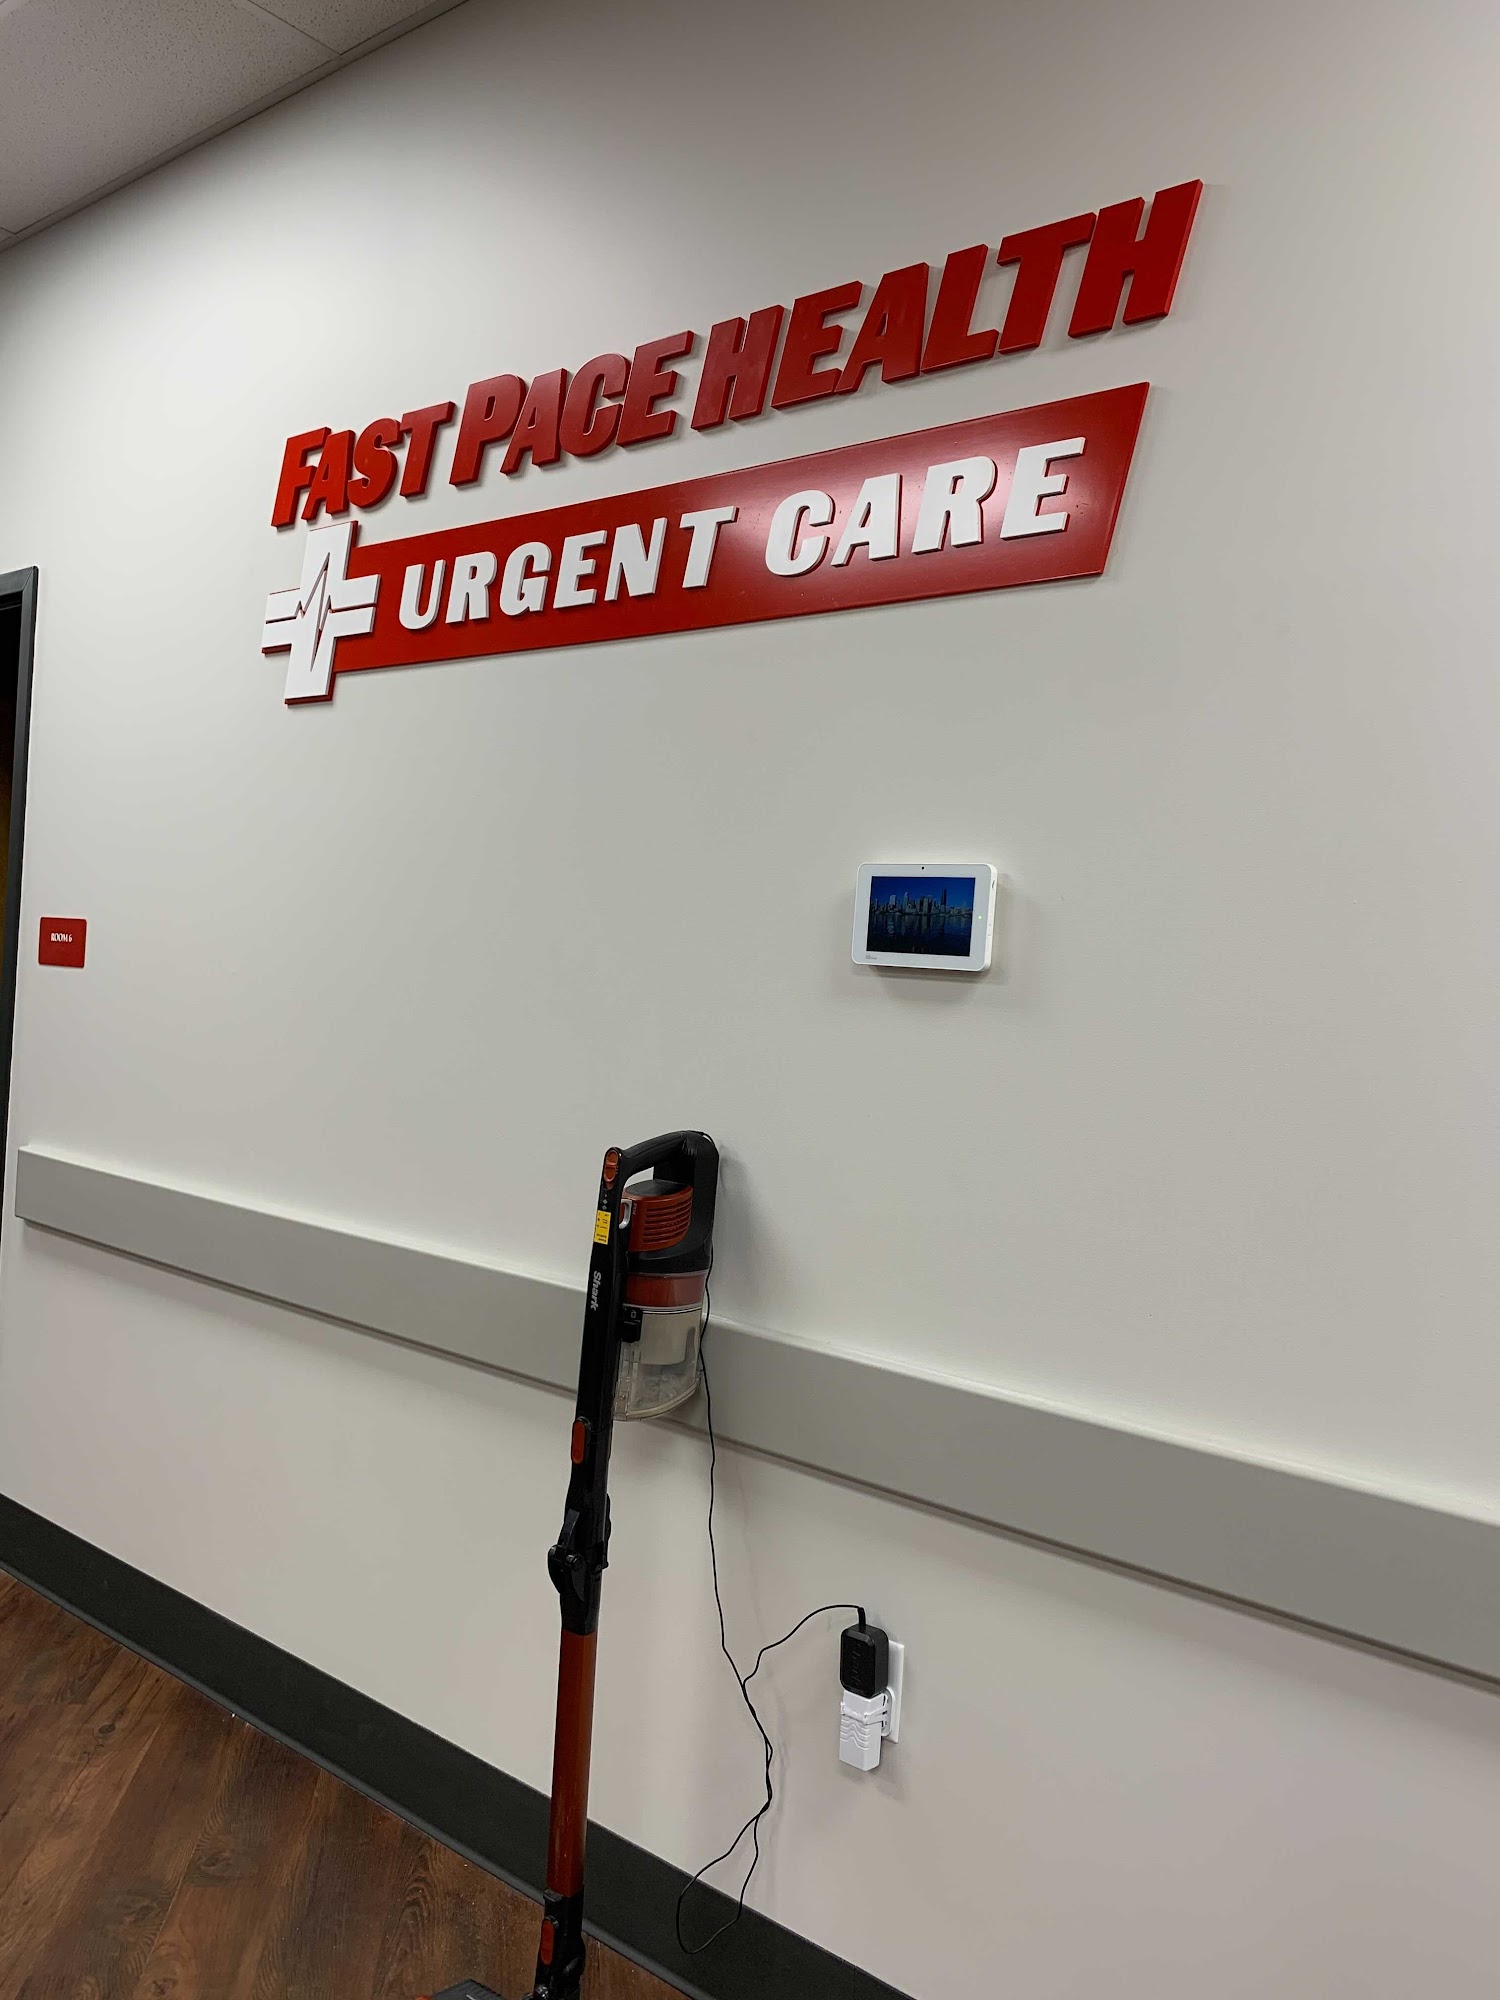 Fast Pace Health Urgent Care - Richland, MS 907 US 49, Richland Mississippi 39218